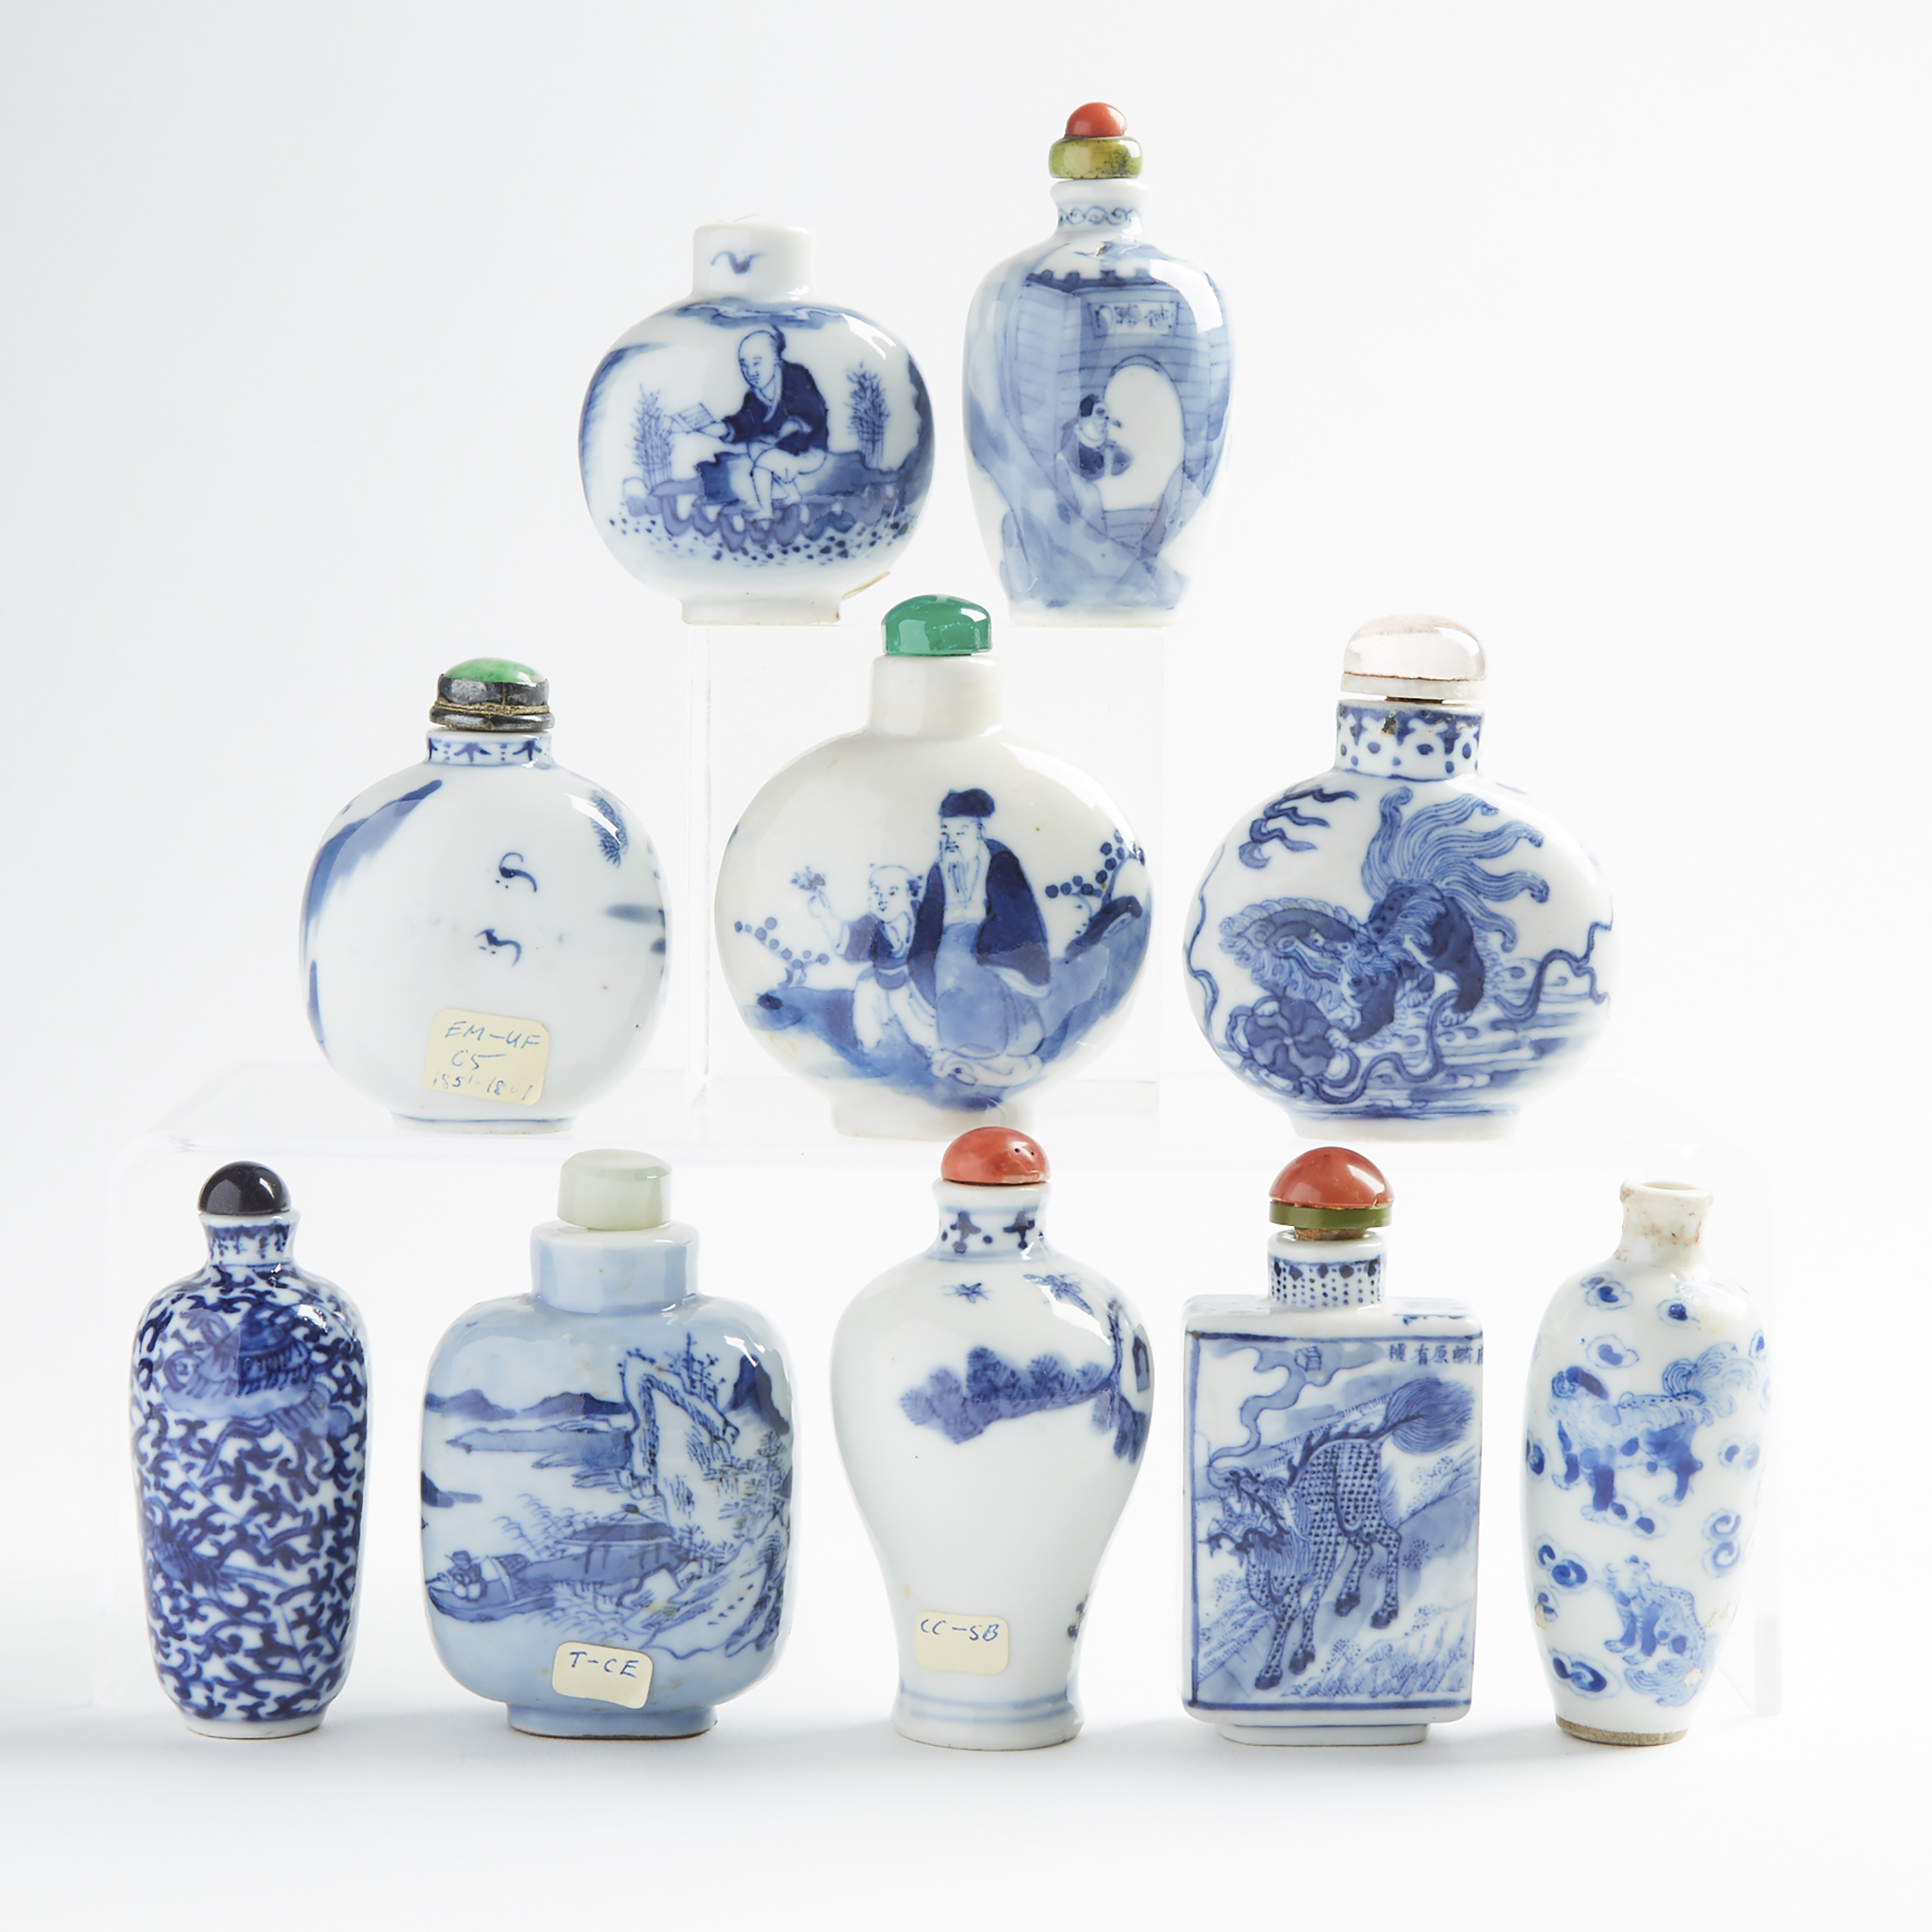 A Group of Ten Blue and White Snuff Bottles, 19th/20th Century